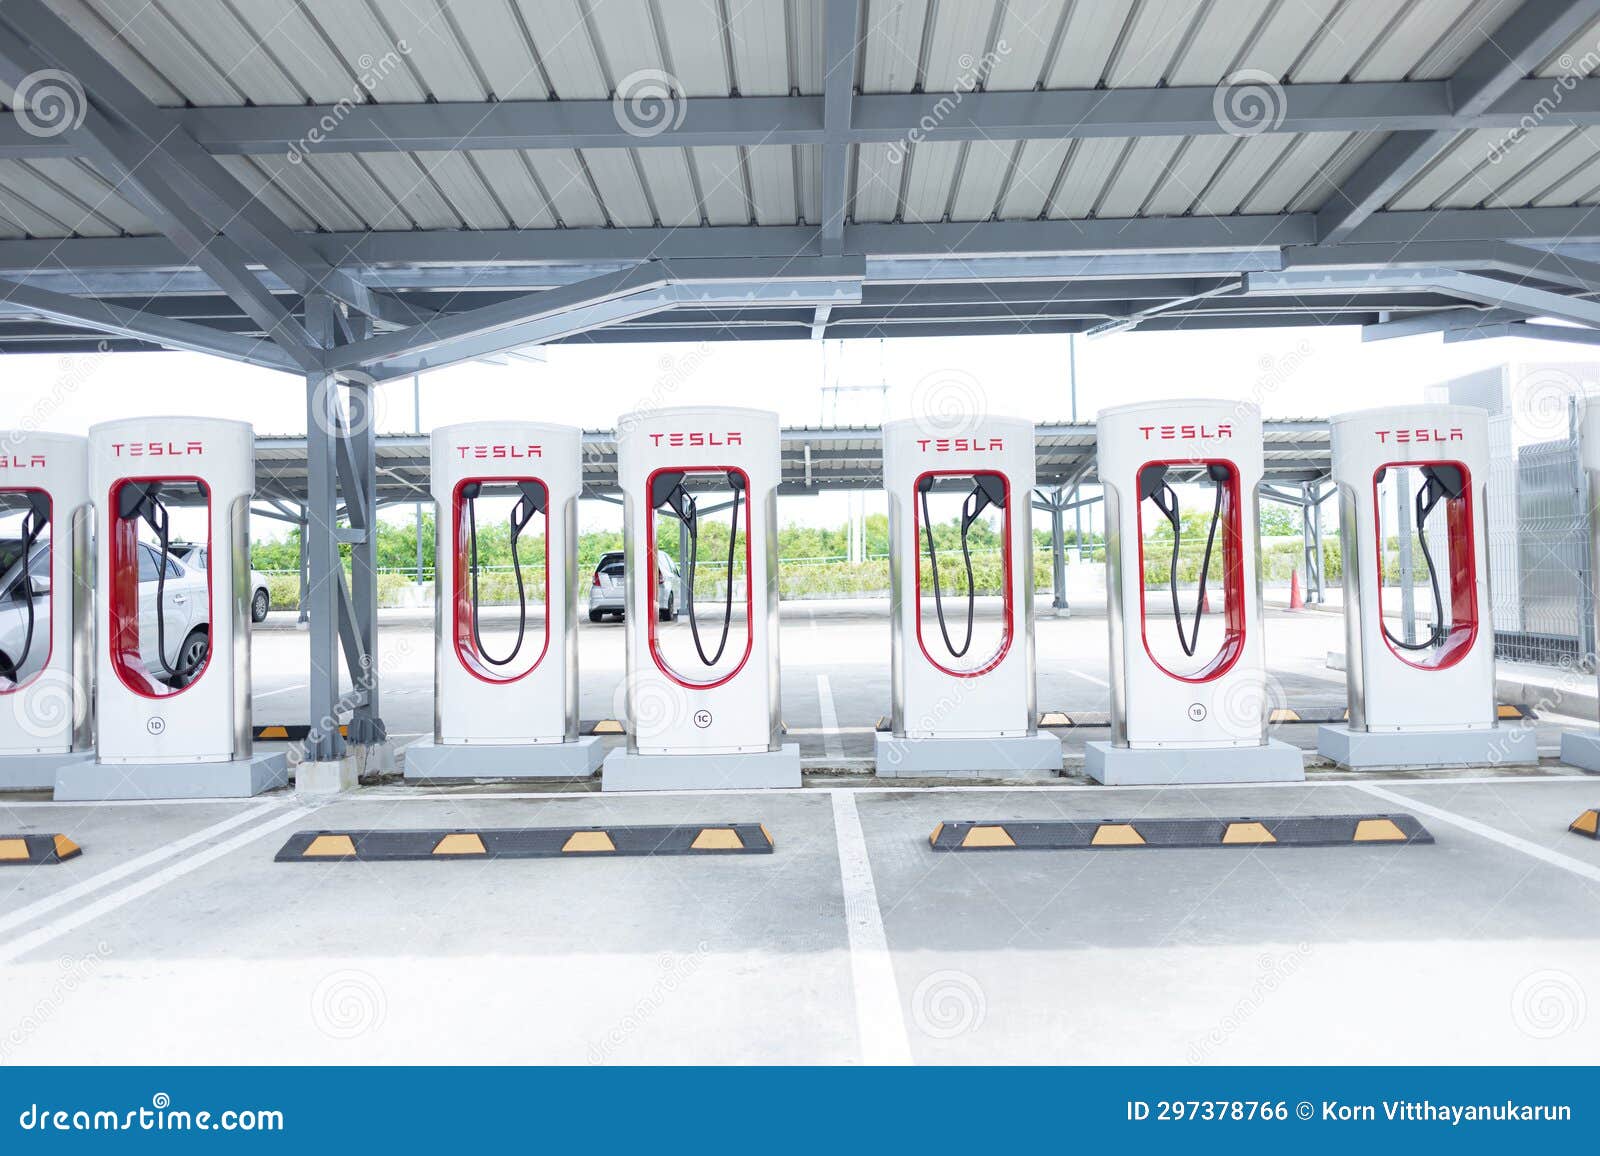 Tesla Supercharger 250 KW Dock Station for High Speed Tesla Brand Ev Car  Batter Charge Open Service in Bangkok,THAILAND, November Editorial Photo -  Image of sustainability, city: 297378766